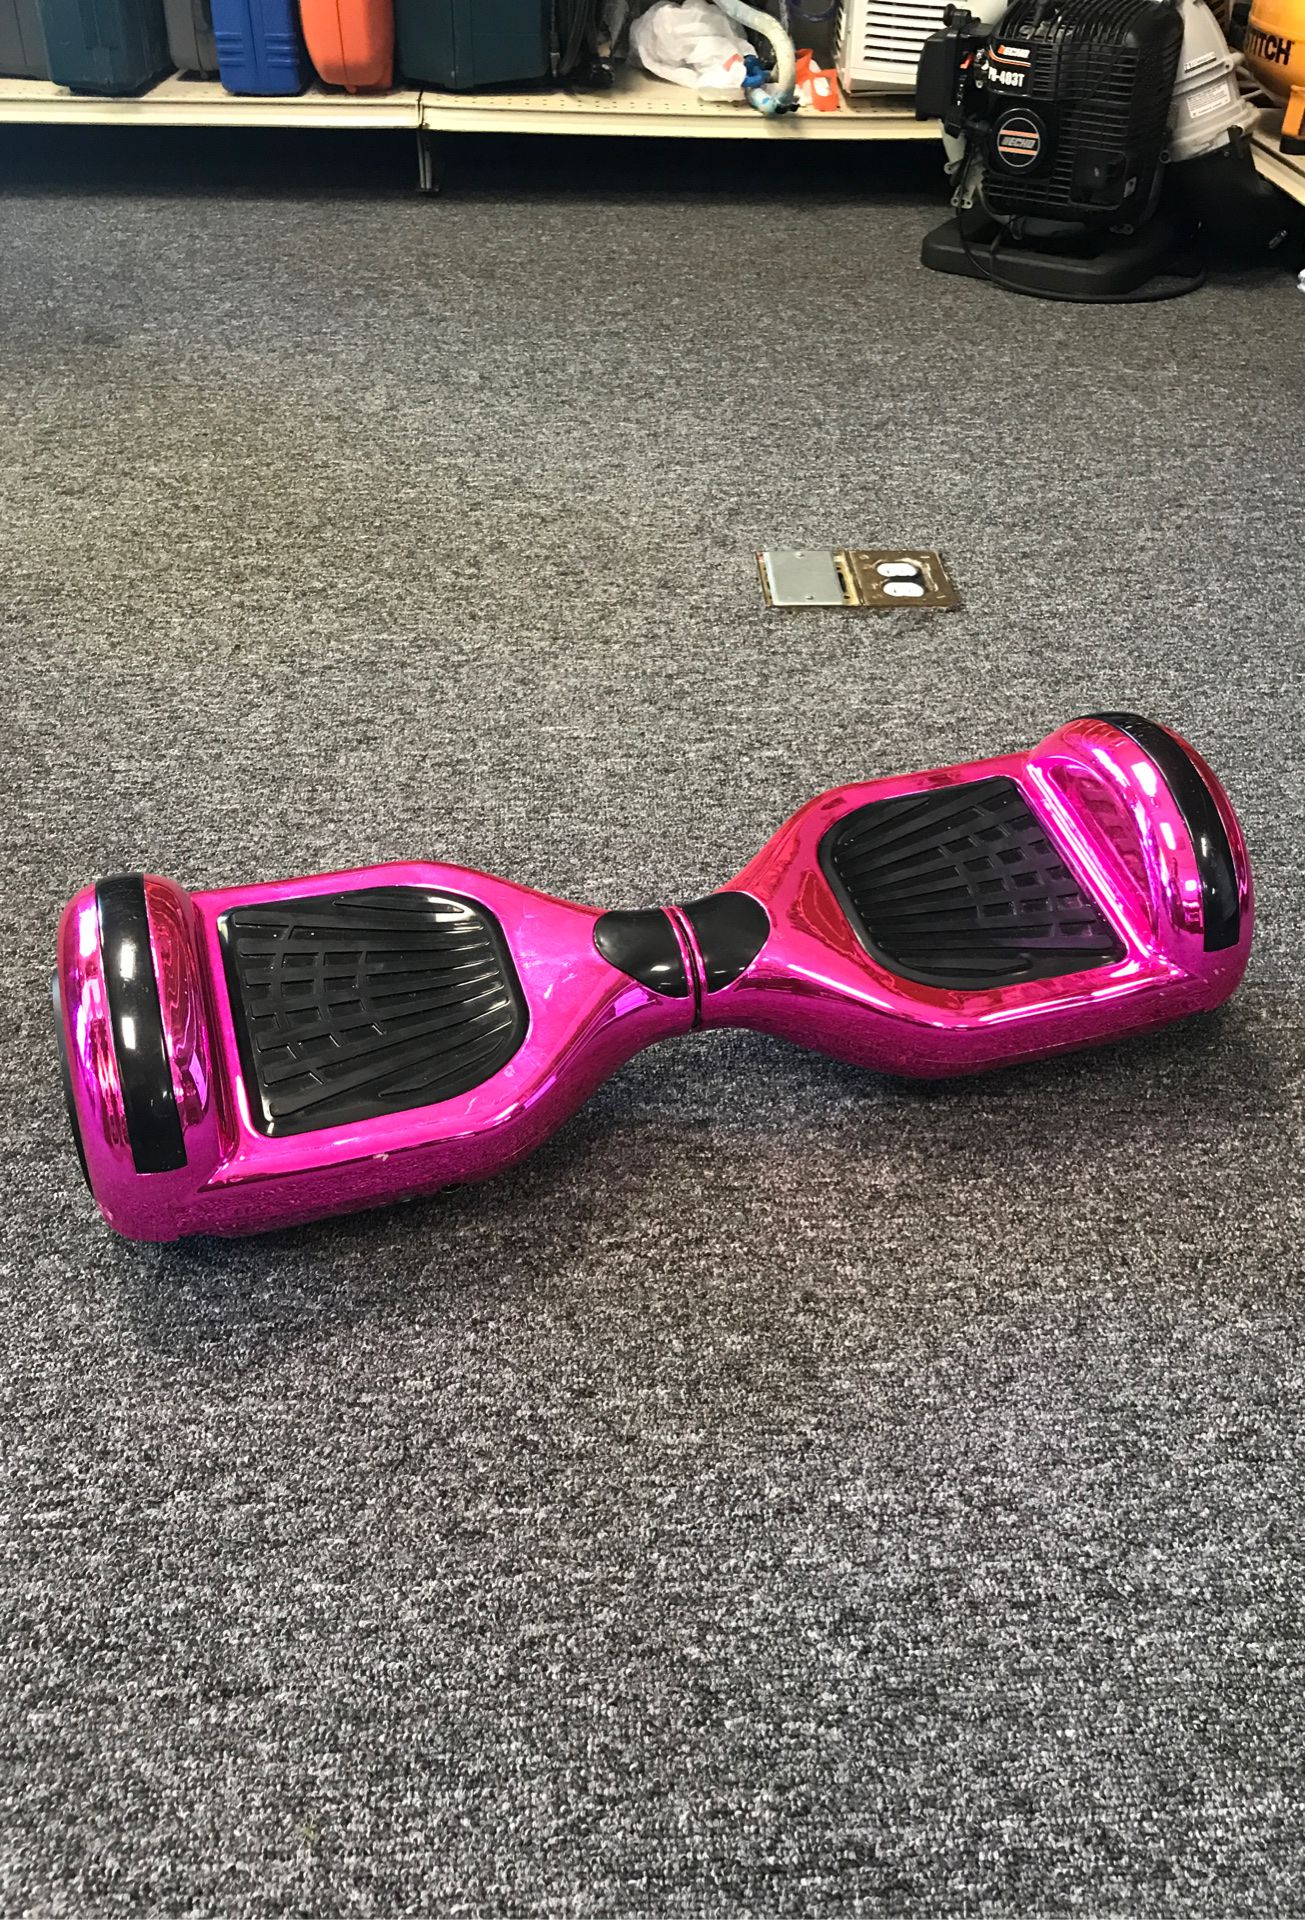 Toy Hoverboard